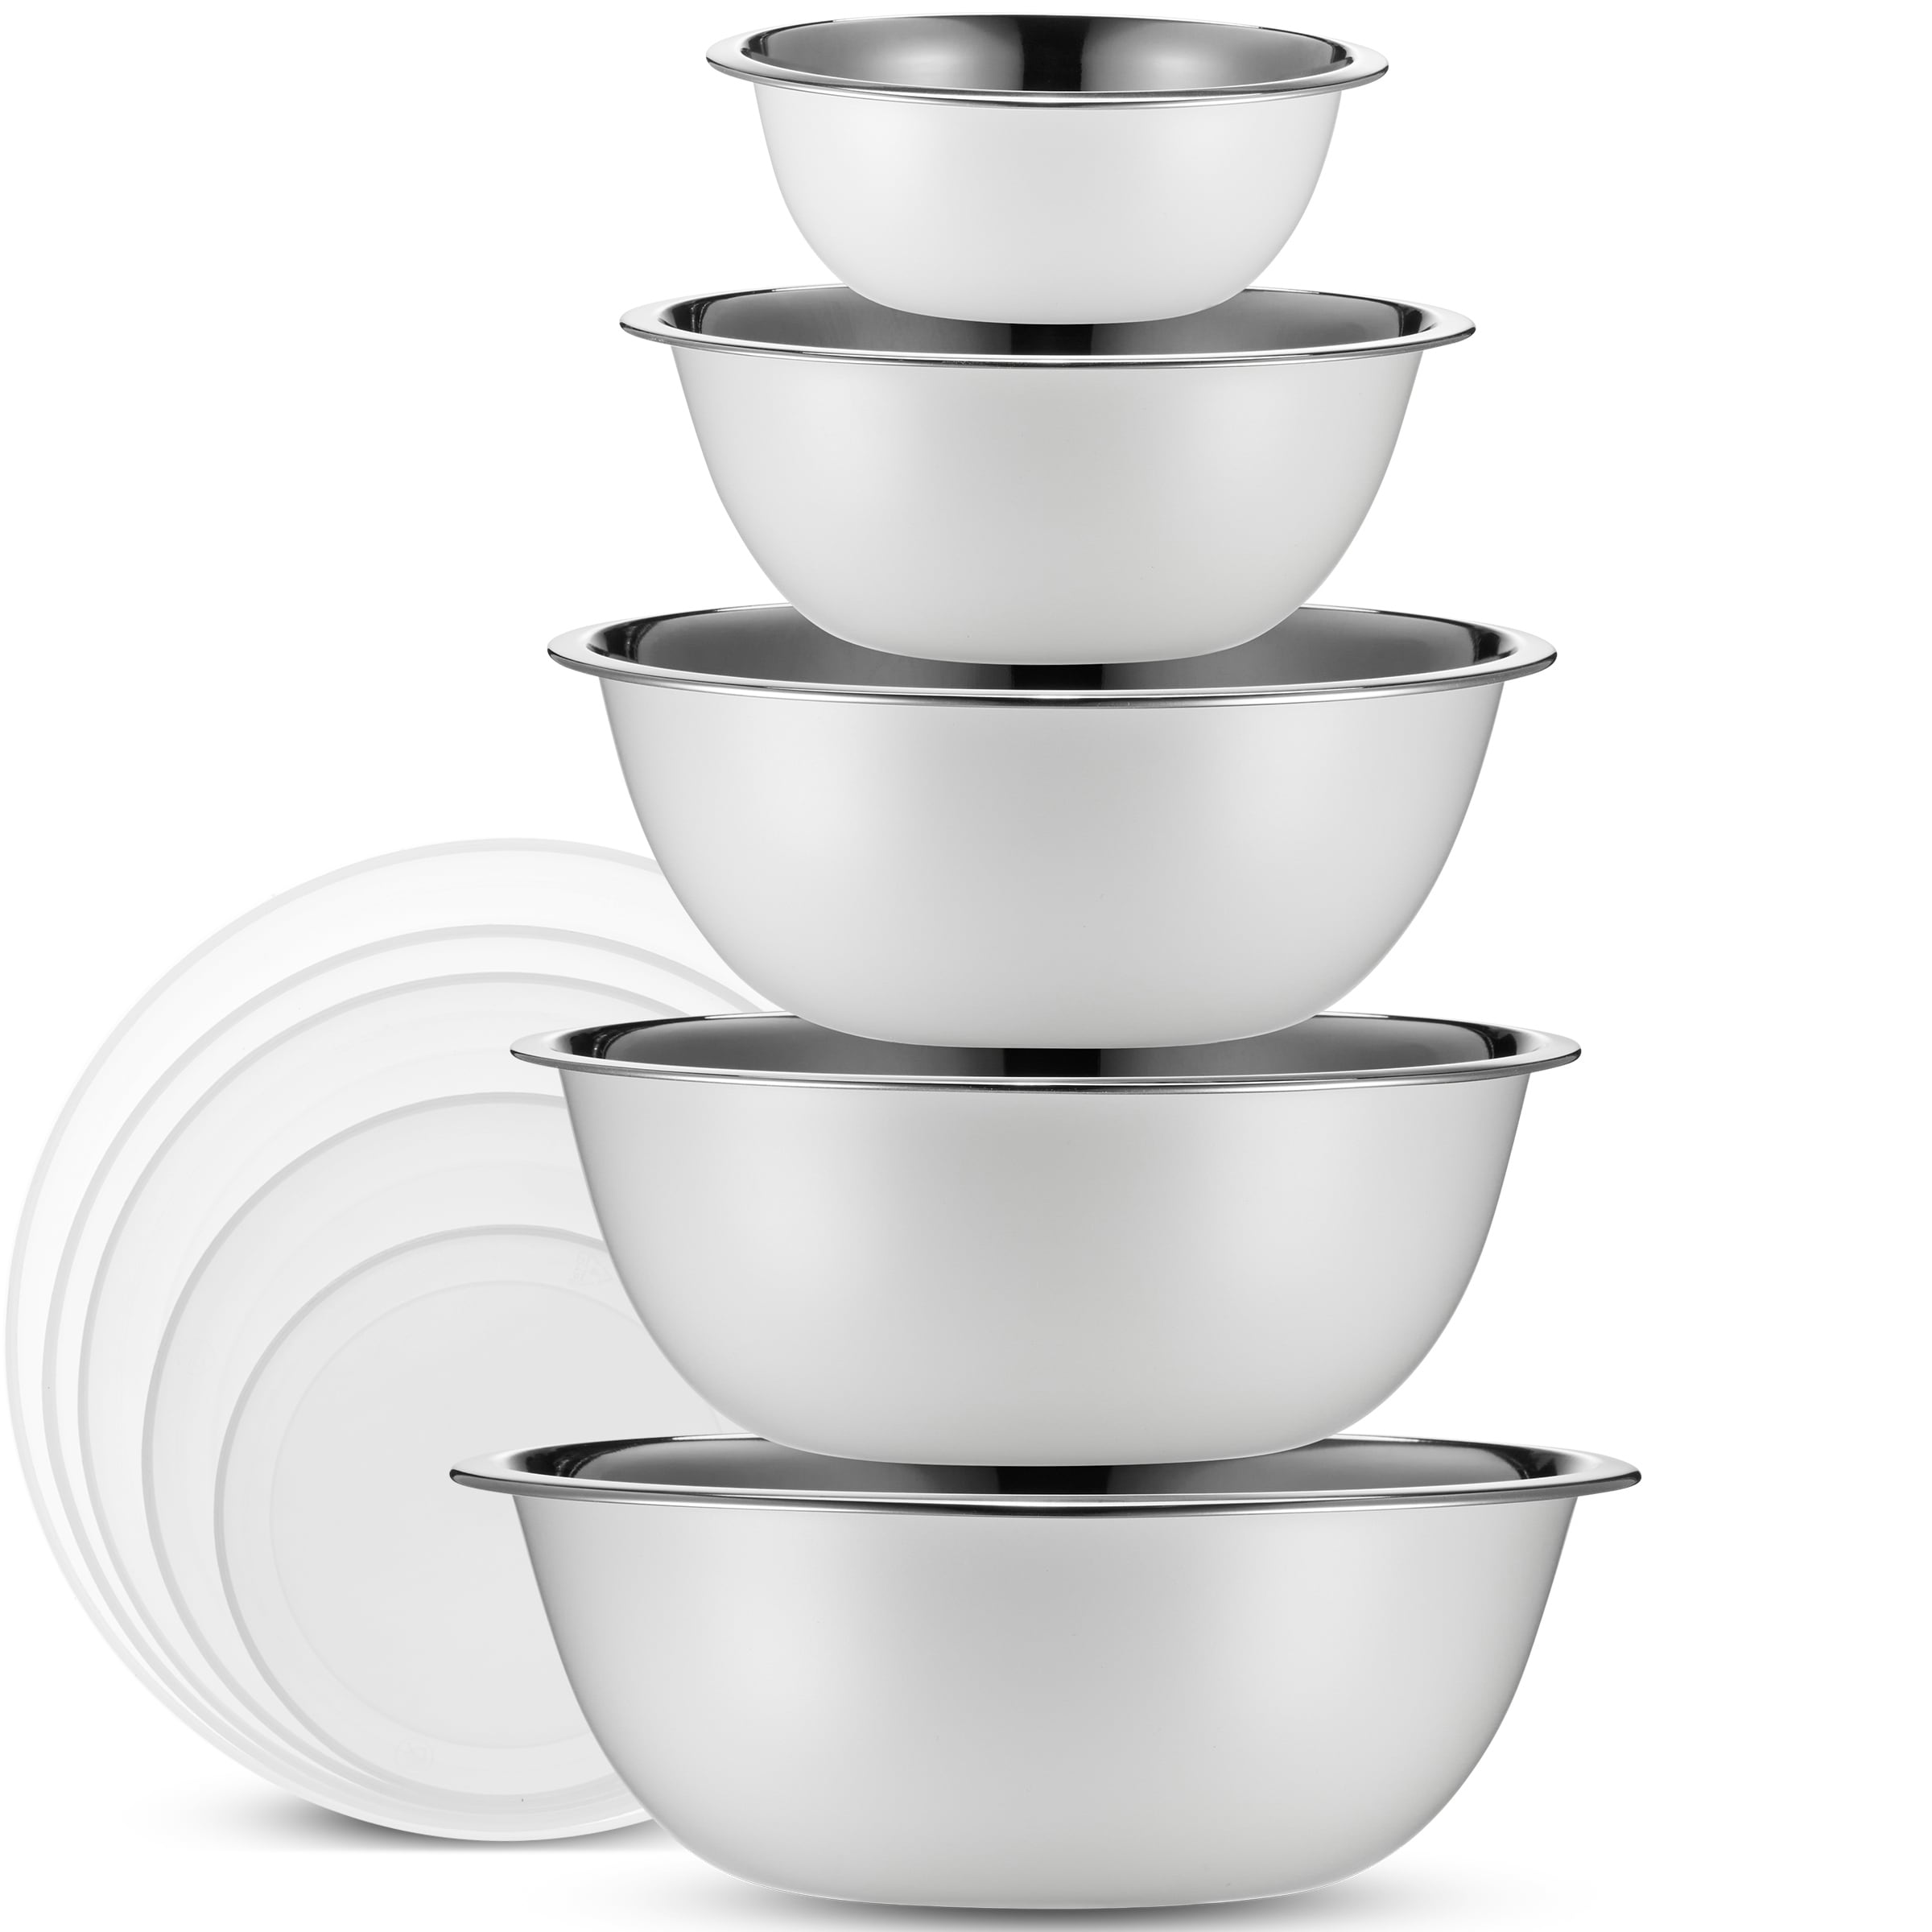 https://ak1.ostkcdn.com/images/products/is/images/direct/4923db78162d862acd6e8123ca9e53ac6a52504e/Heavy-Duty-Meal-Prep-Stainless-Steel-Mixing-Bowls-Set-with-Lids.jpg